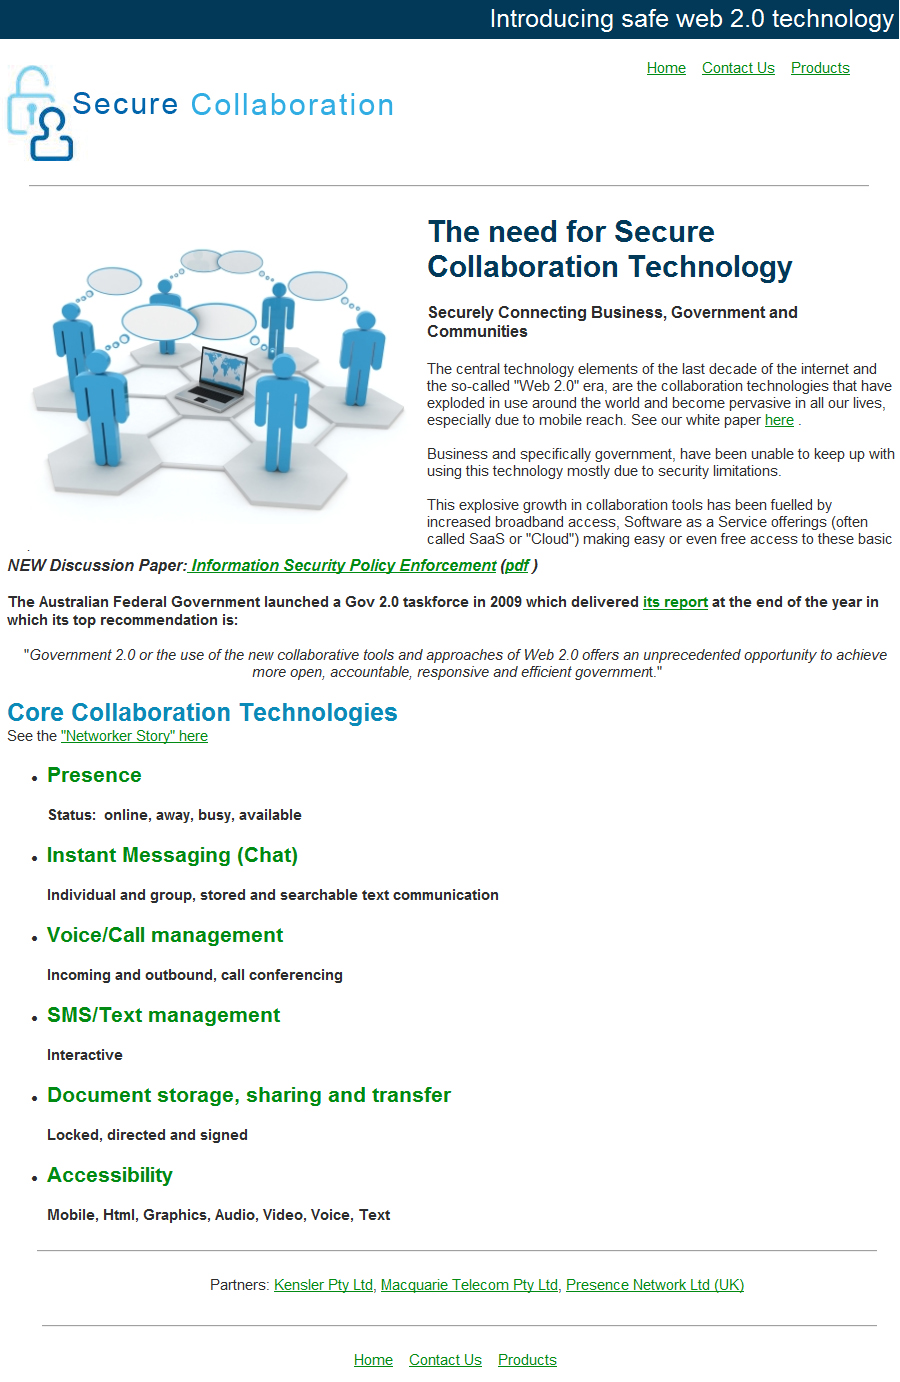 Secure Collaboration